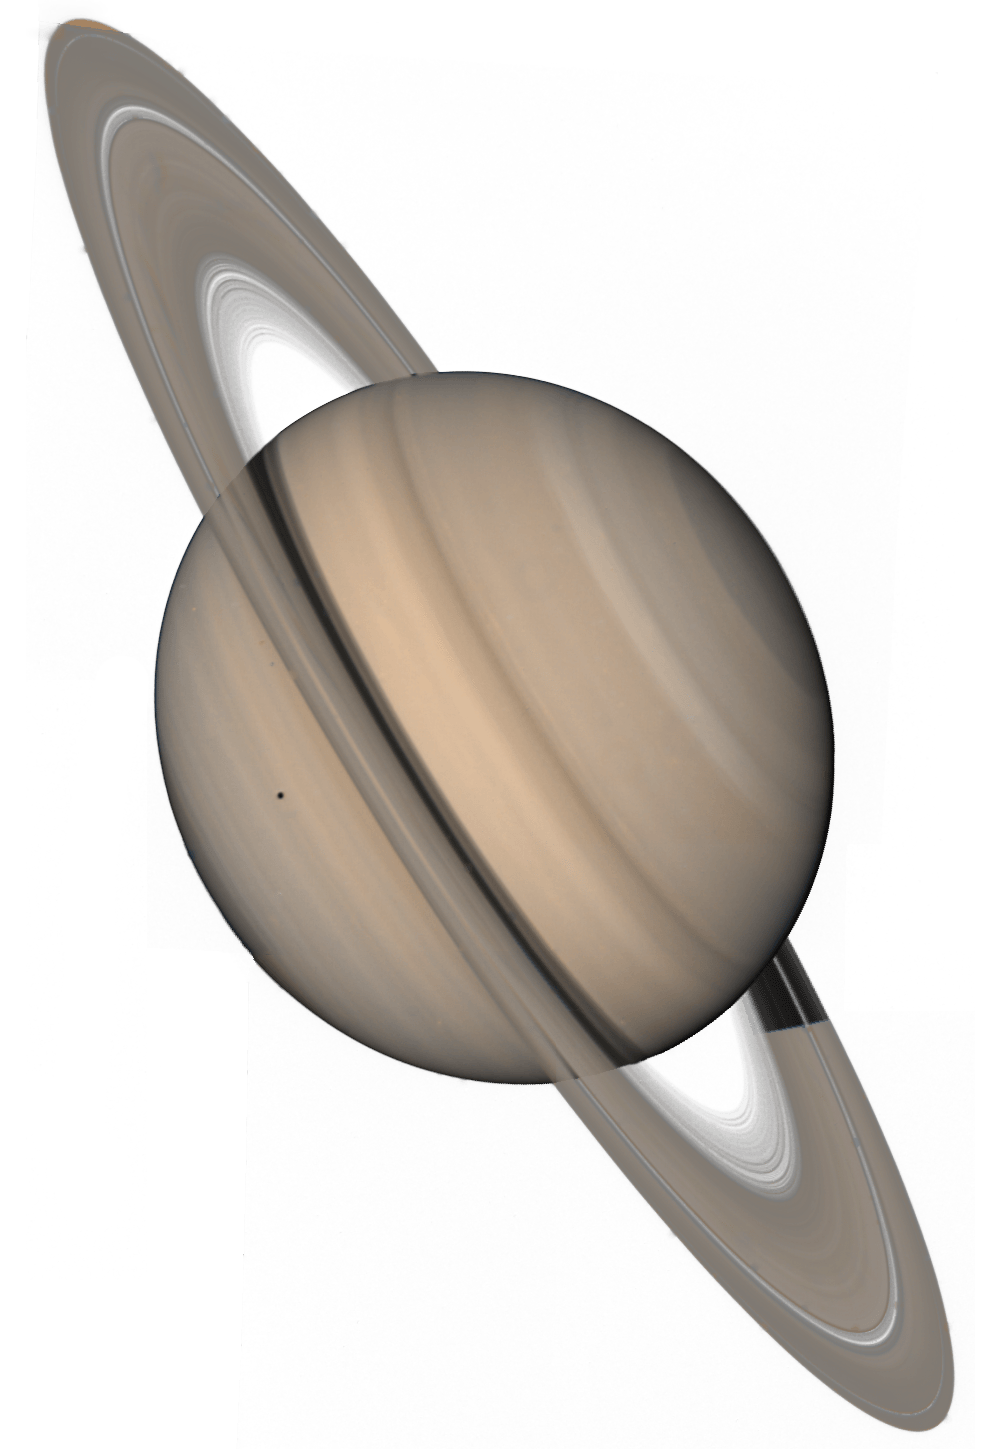 Planet Saturn associated with the numerology of 44